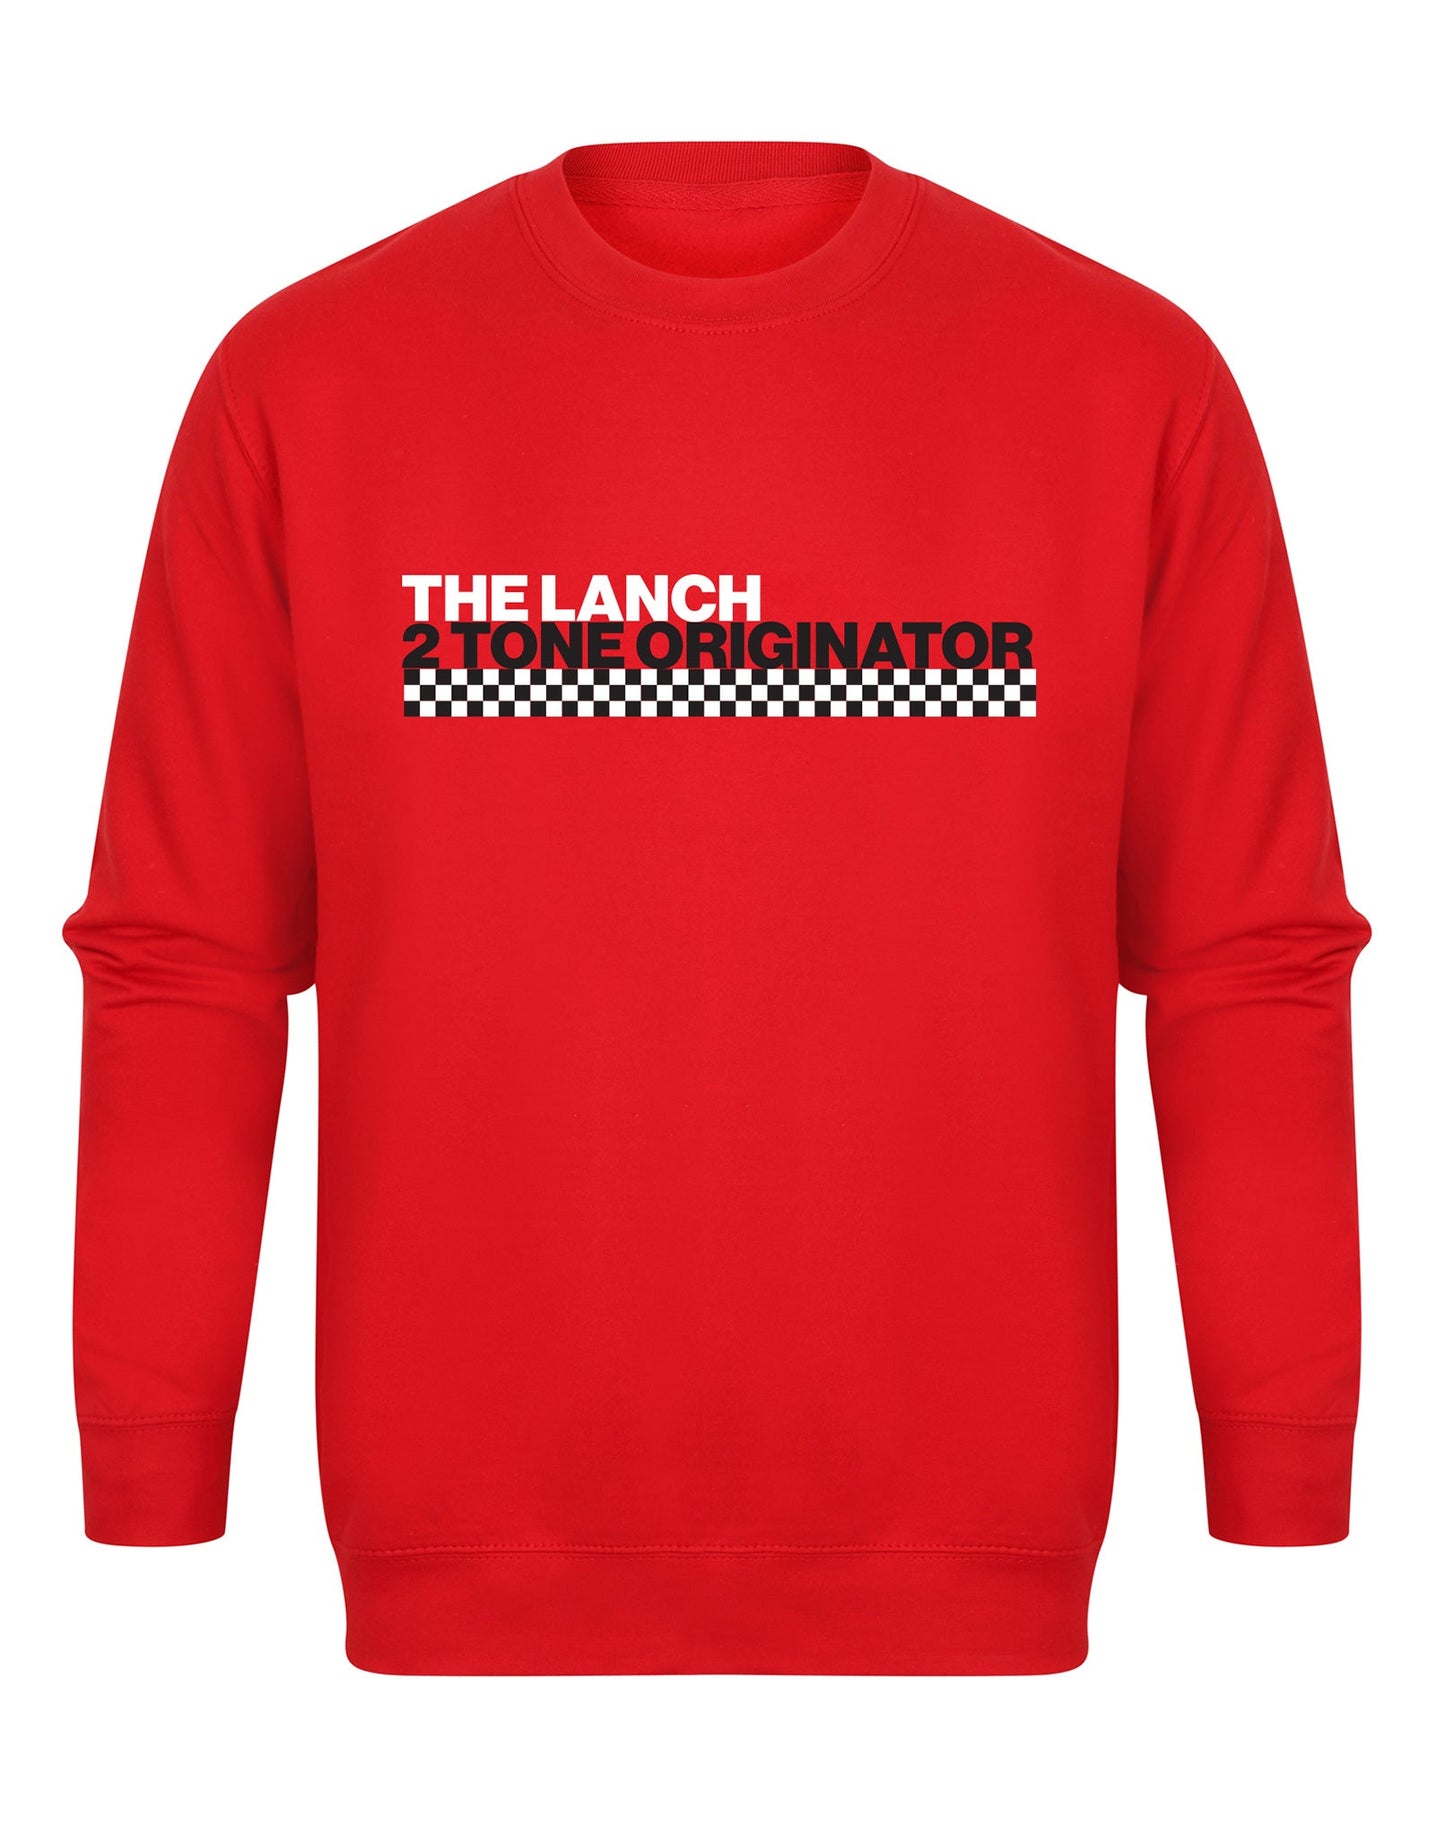 The Lanch - 2 Tone Originator - sweatshirt - various colours - Dirty Stop Outs